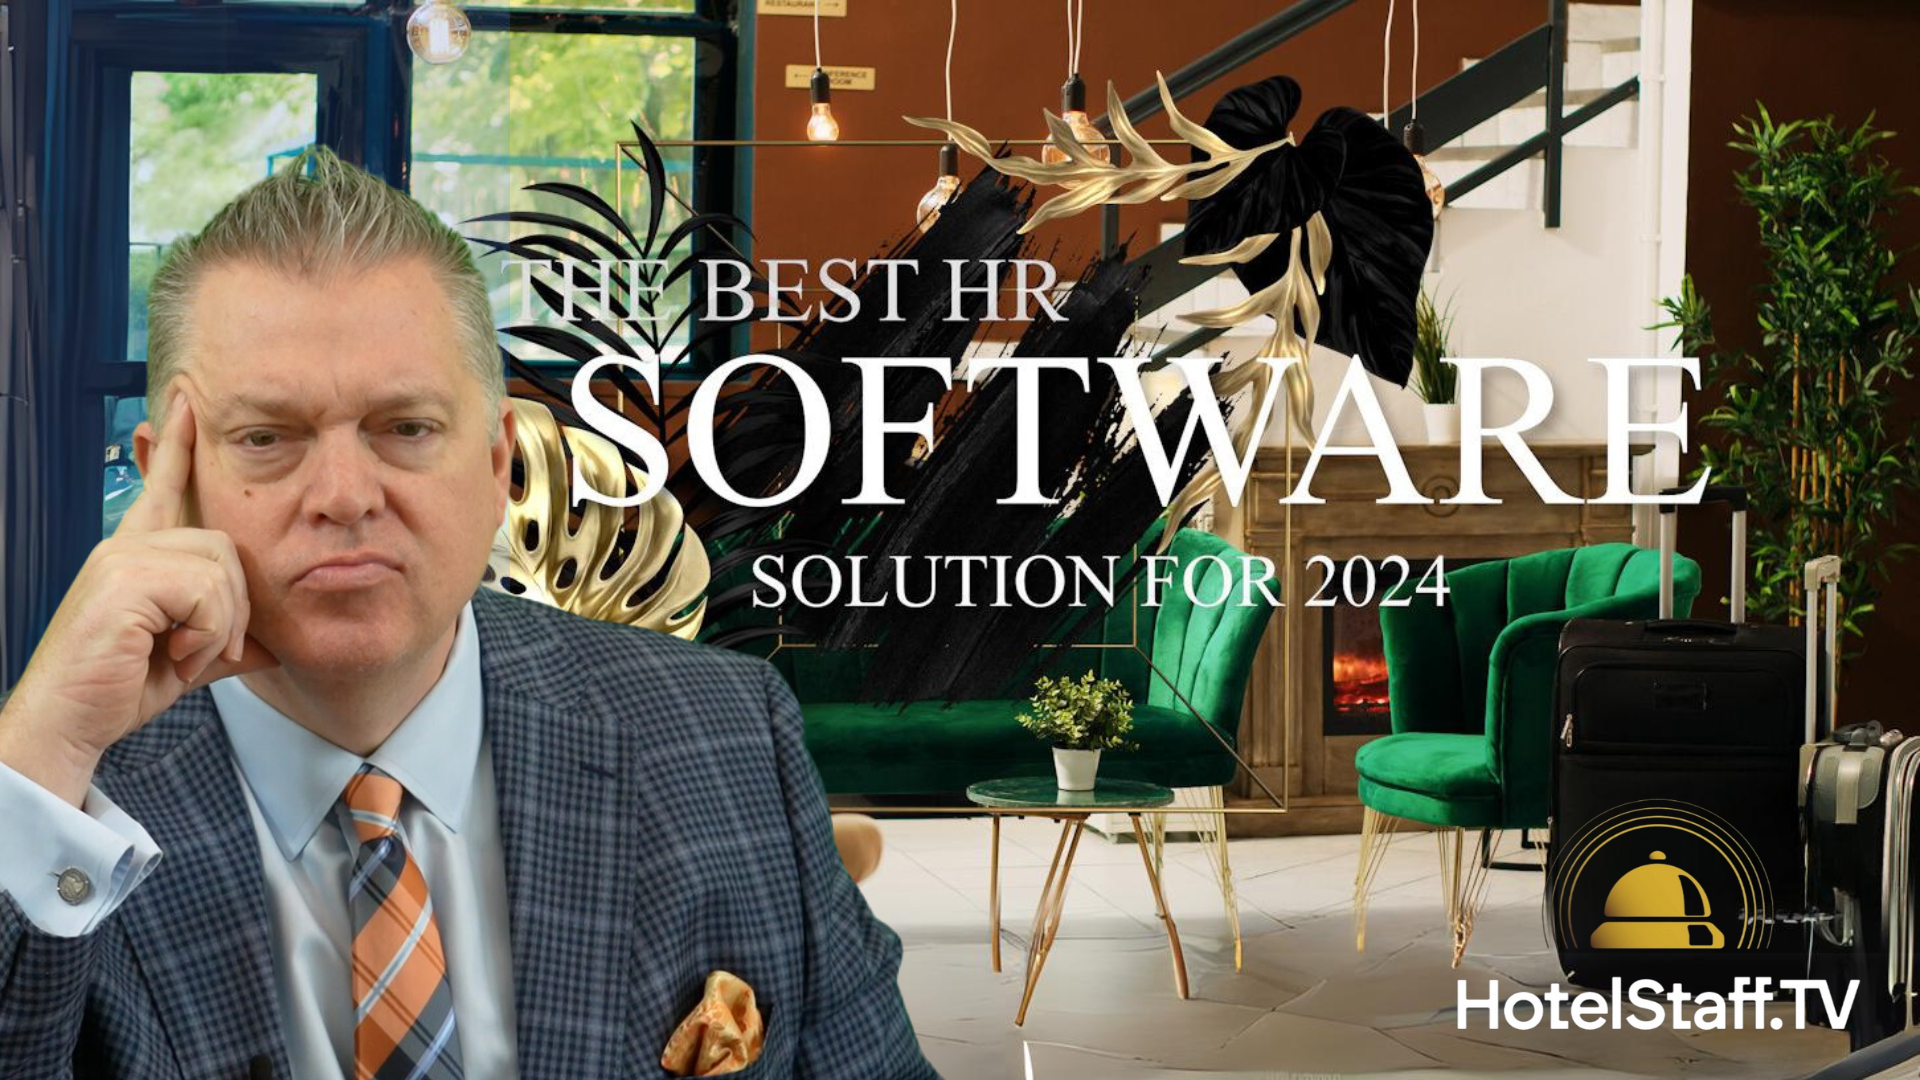 The Best HR Software Solution for 2024